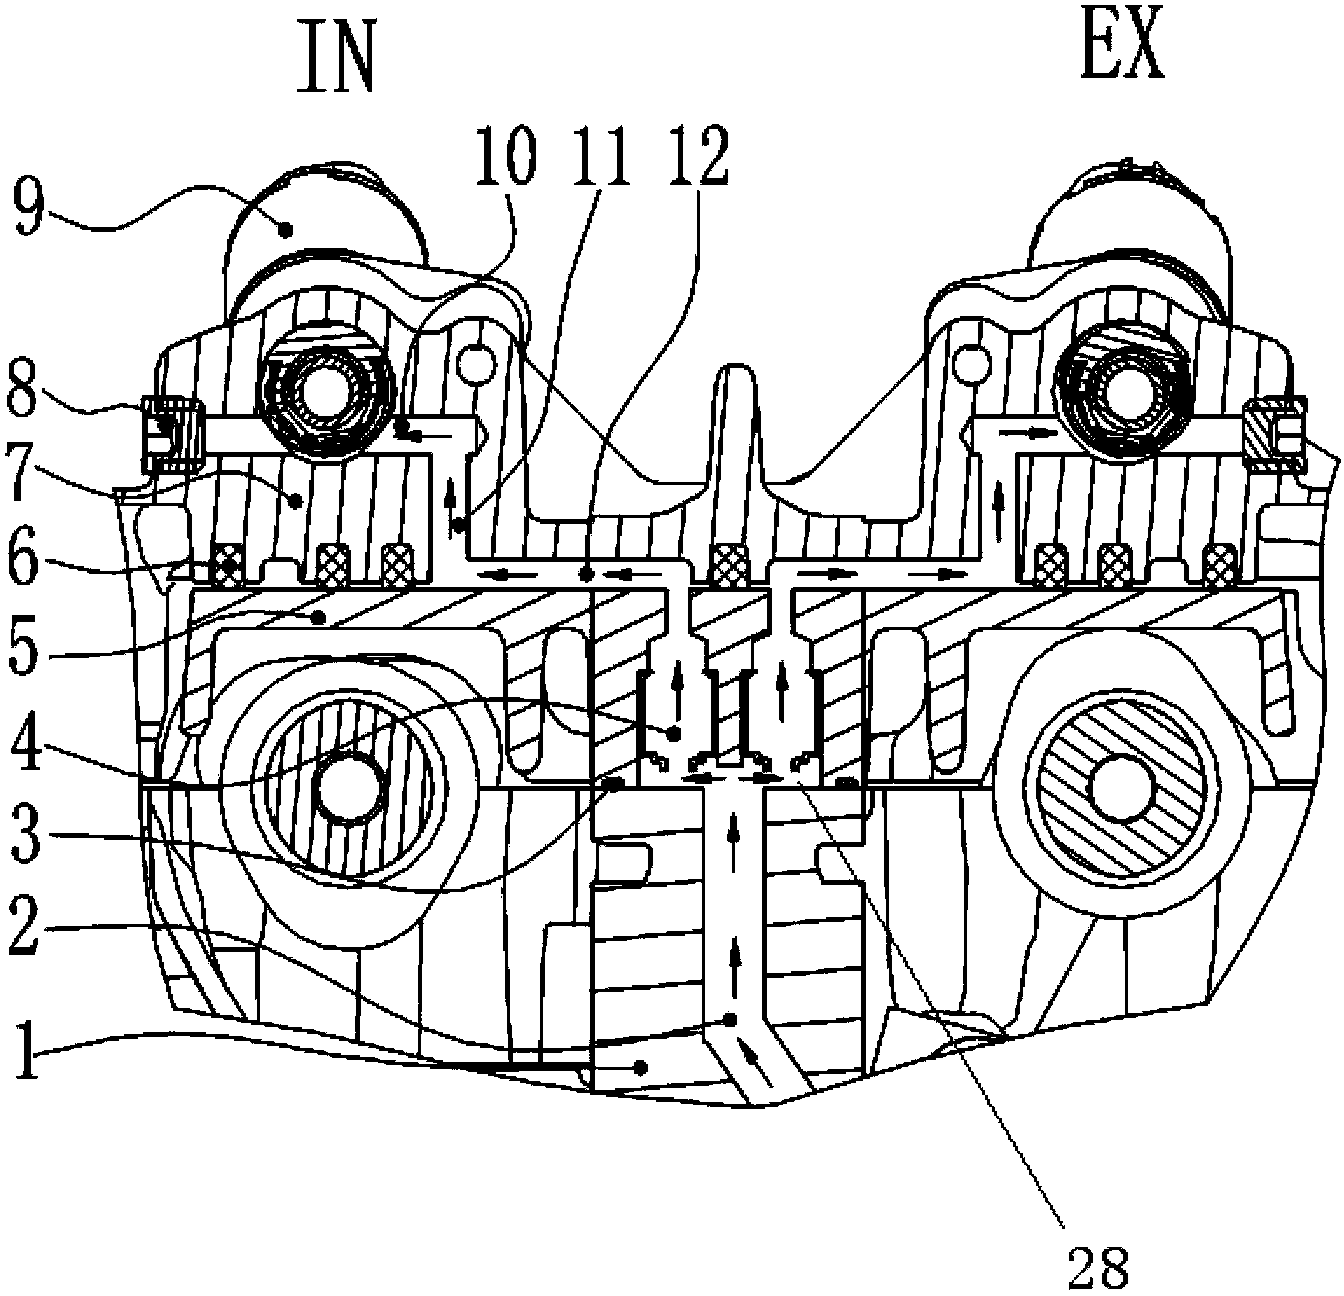 Control oil line of variable valve timing system